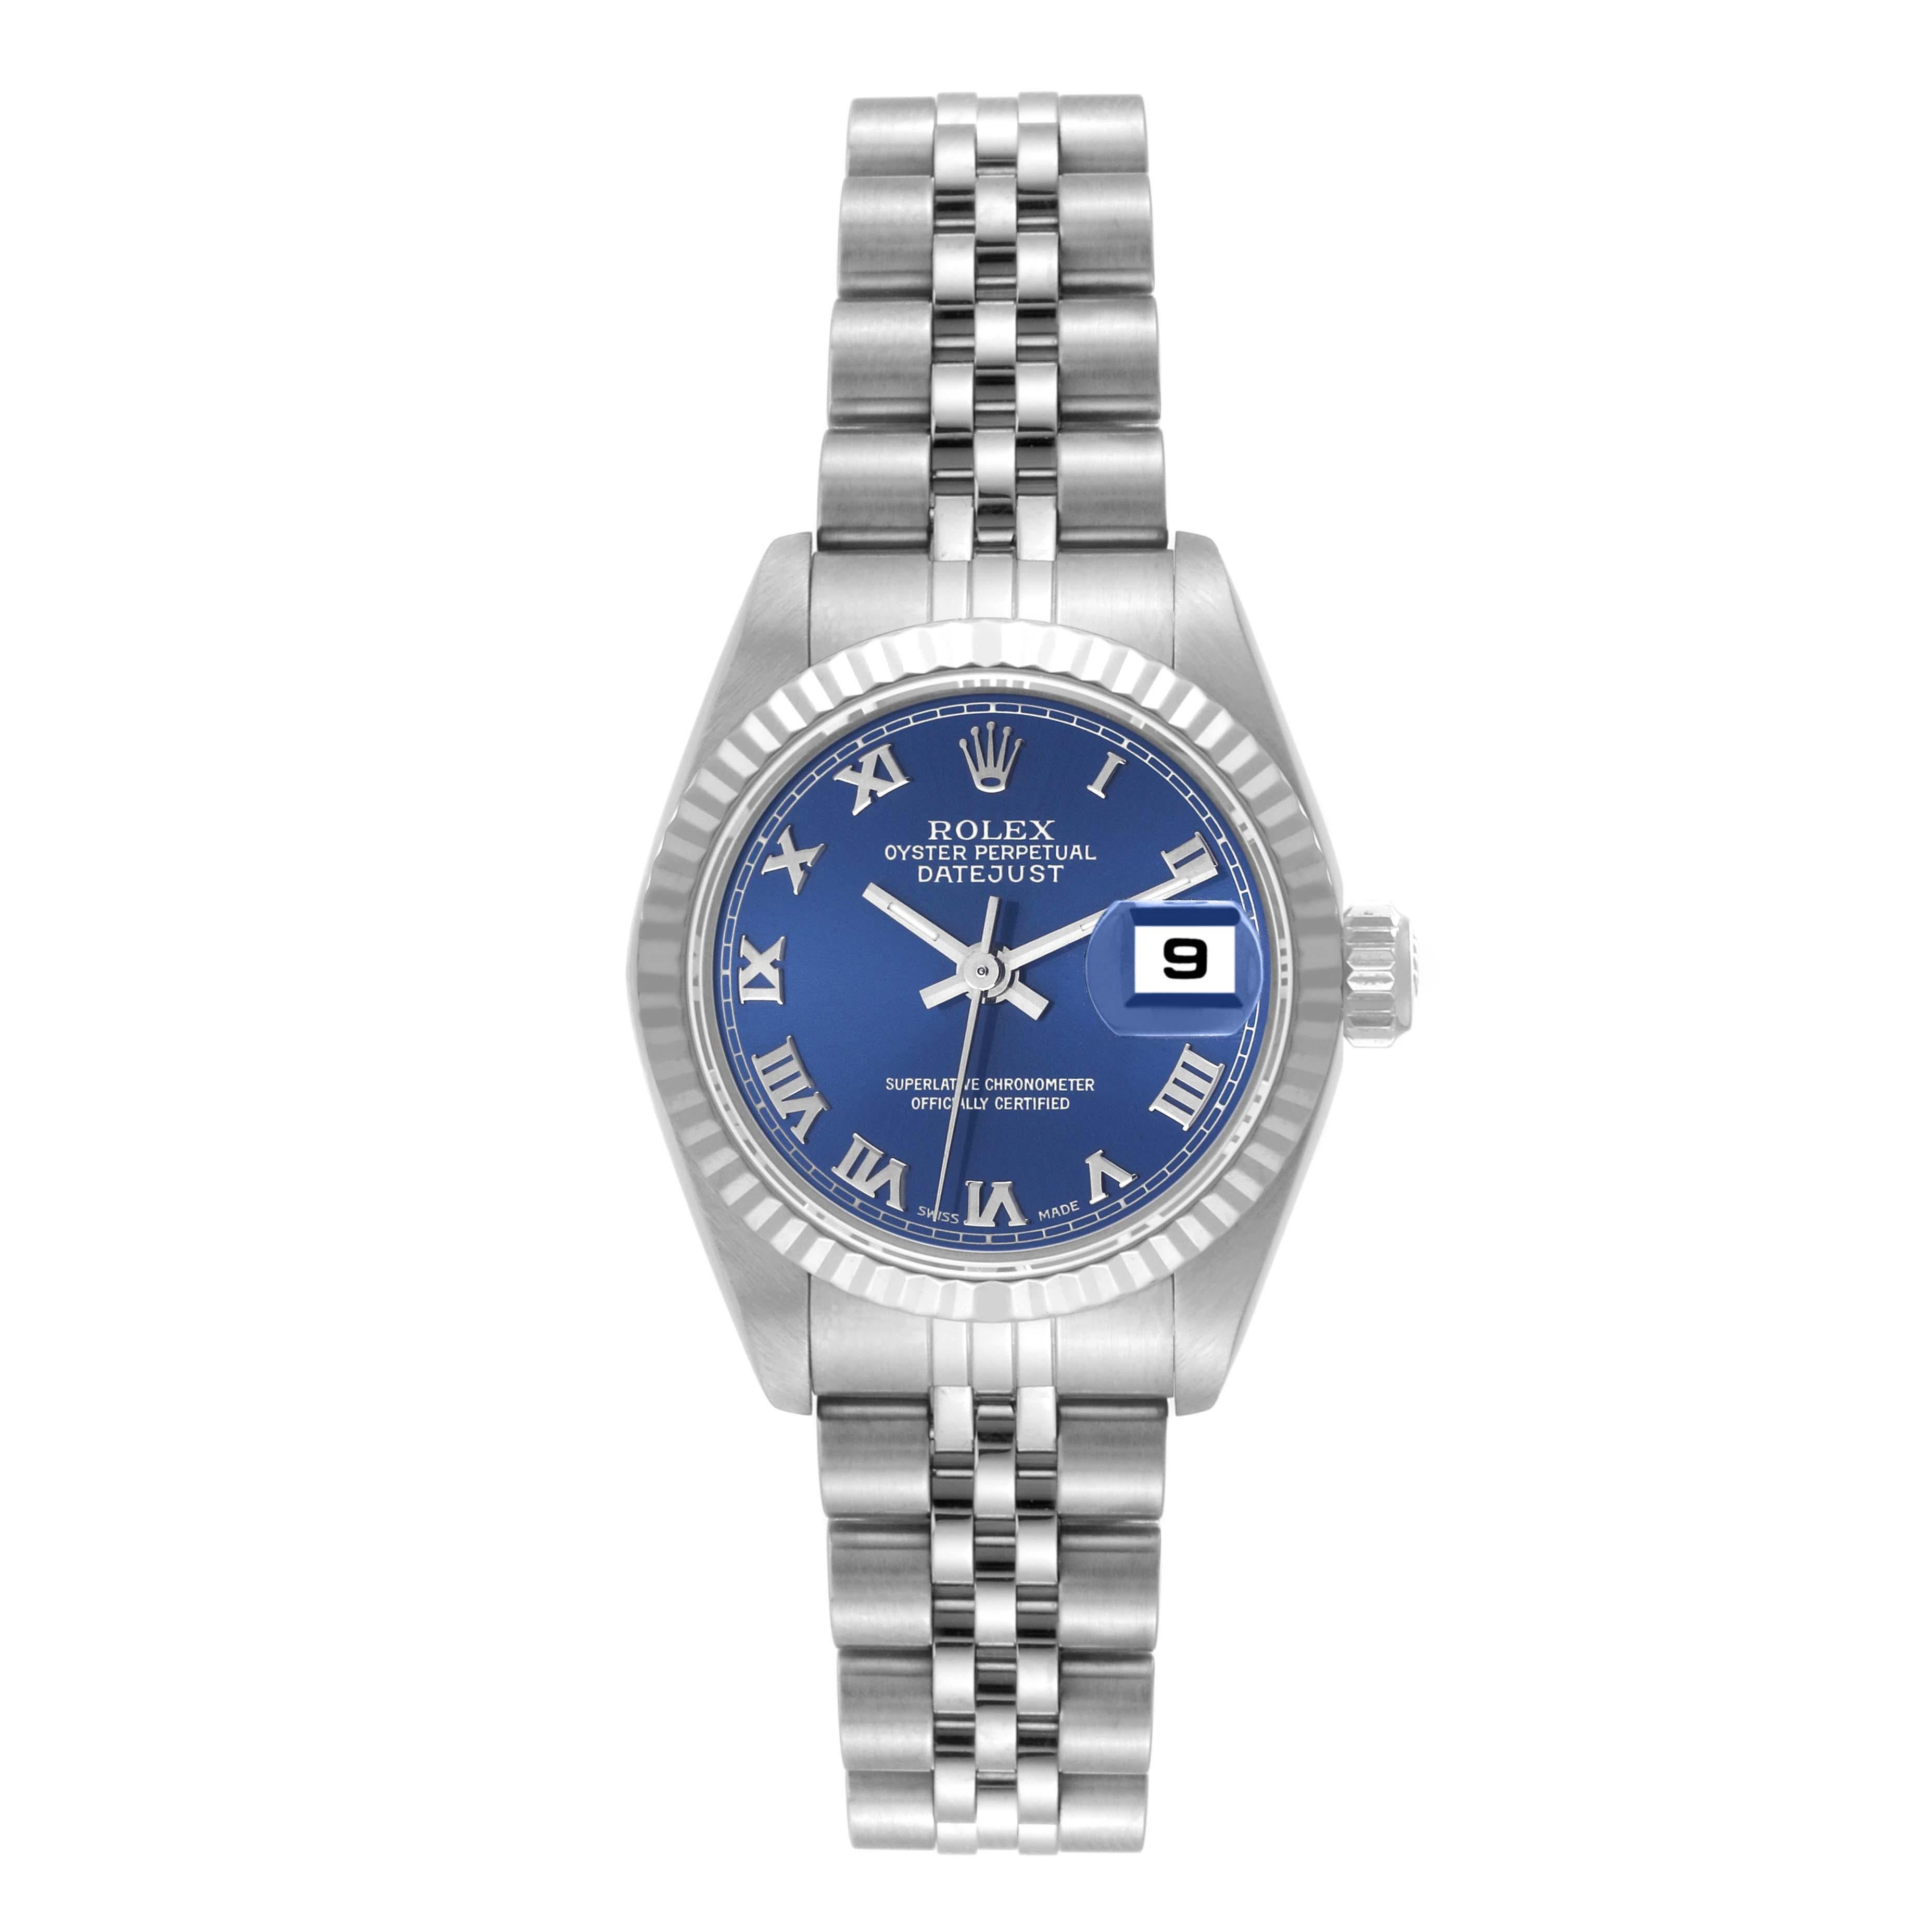 Rolex Datejust Blue Dial White Gold Steel Ladies Watch 79174. Officially certified chronometer automatic self-winding movement. Stainless steel oyster case 26.0 mm in diameter. Rolex logo on the crown. 18k white gold fluted bezel. Scratch resistant